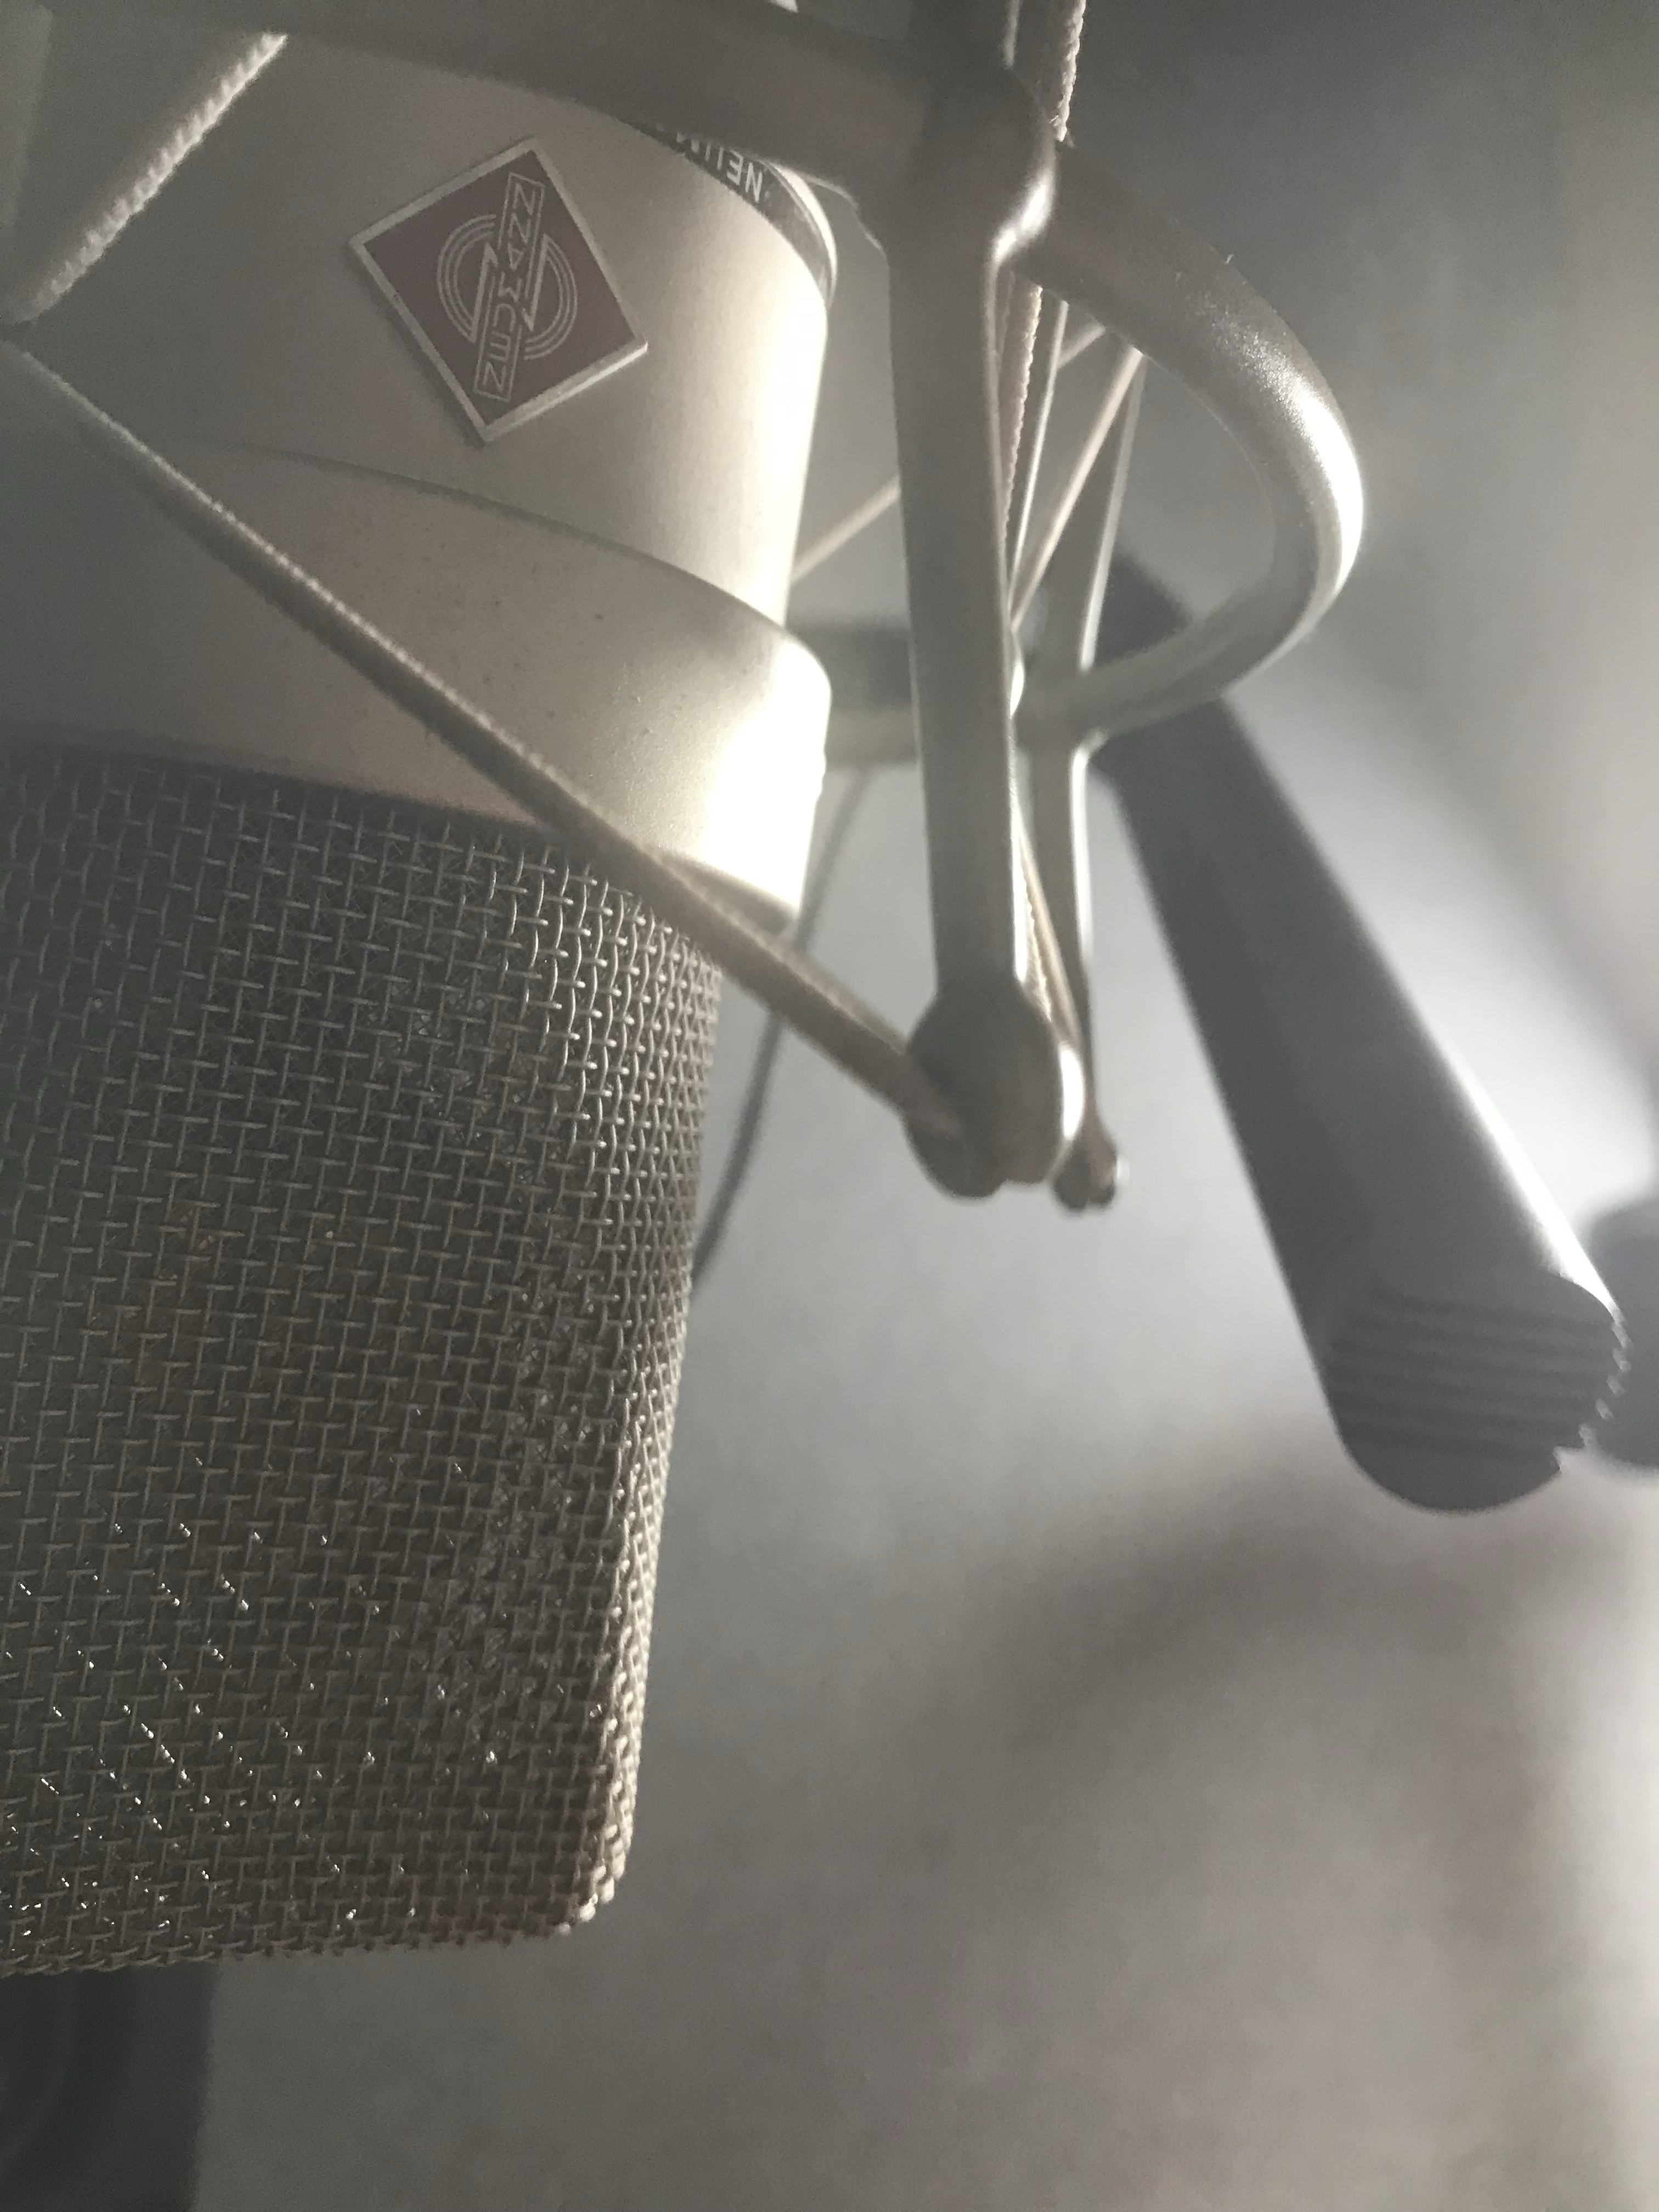 My voiceover studio has Neumann TLM 103 and Sennheiser MKH 416 microphones surrounded by 5